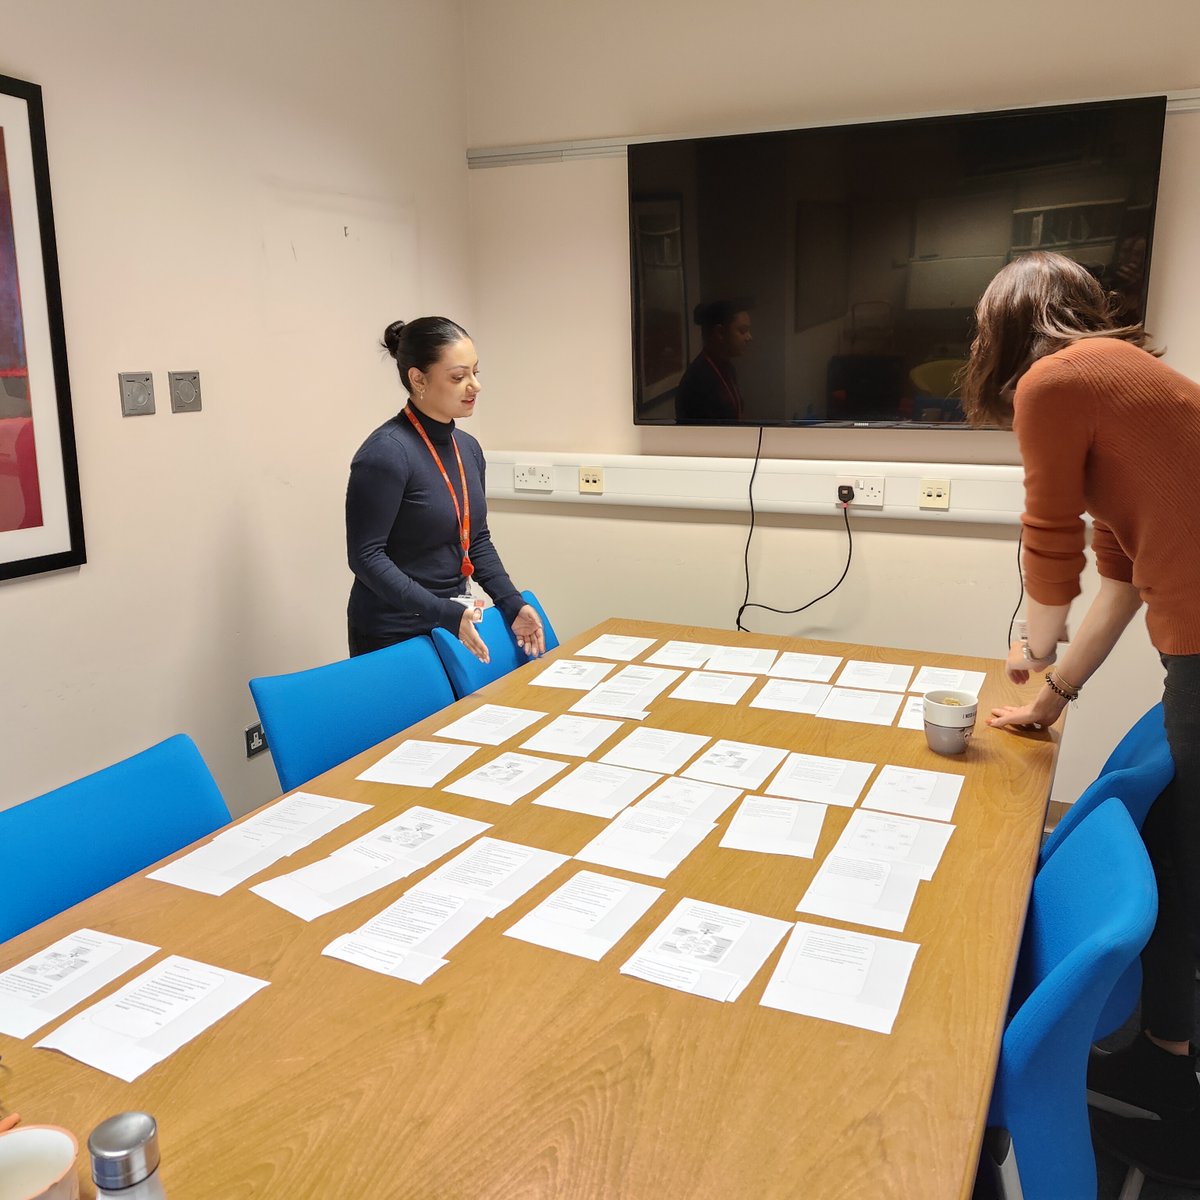 Our team is pressing on with intervention development and working out what will be in the first version of the REFUEL-MS app. Thanks to all who have been involved and given input so far! #keepingon #refuelms #multiplesclerosis #msresearch